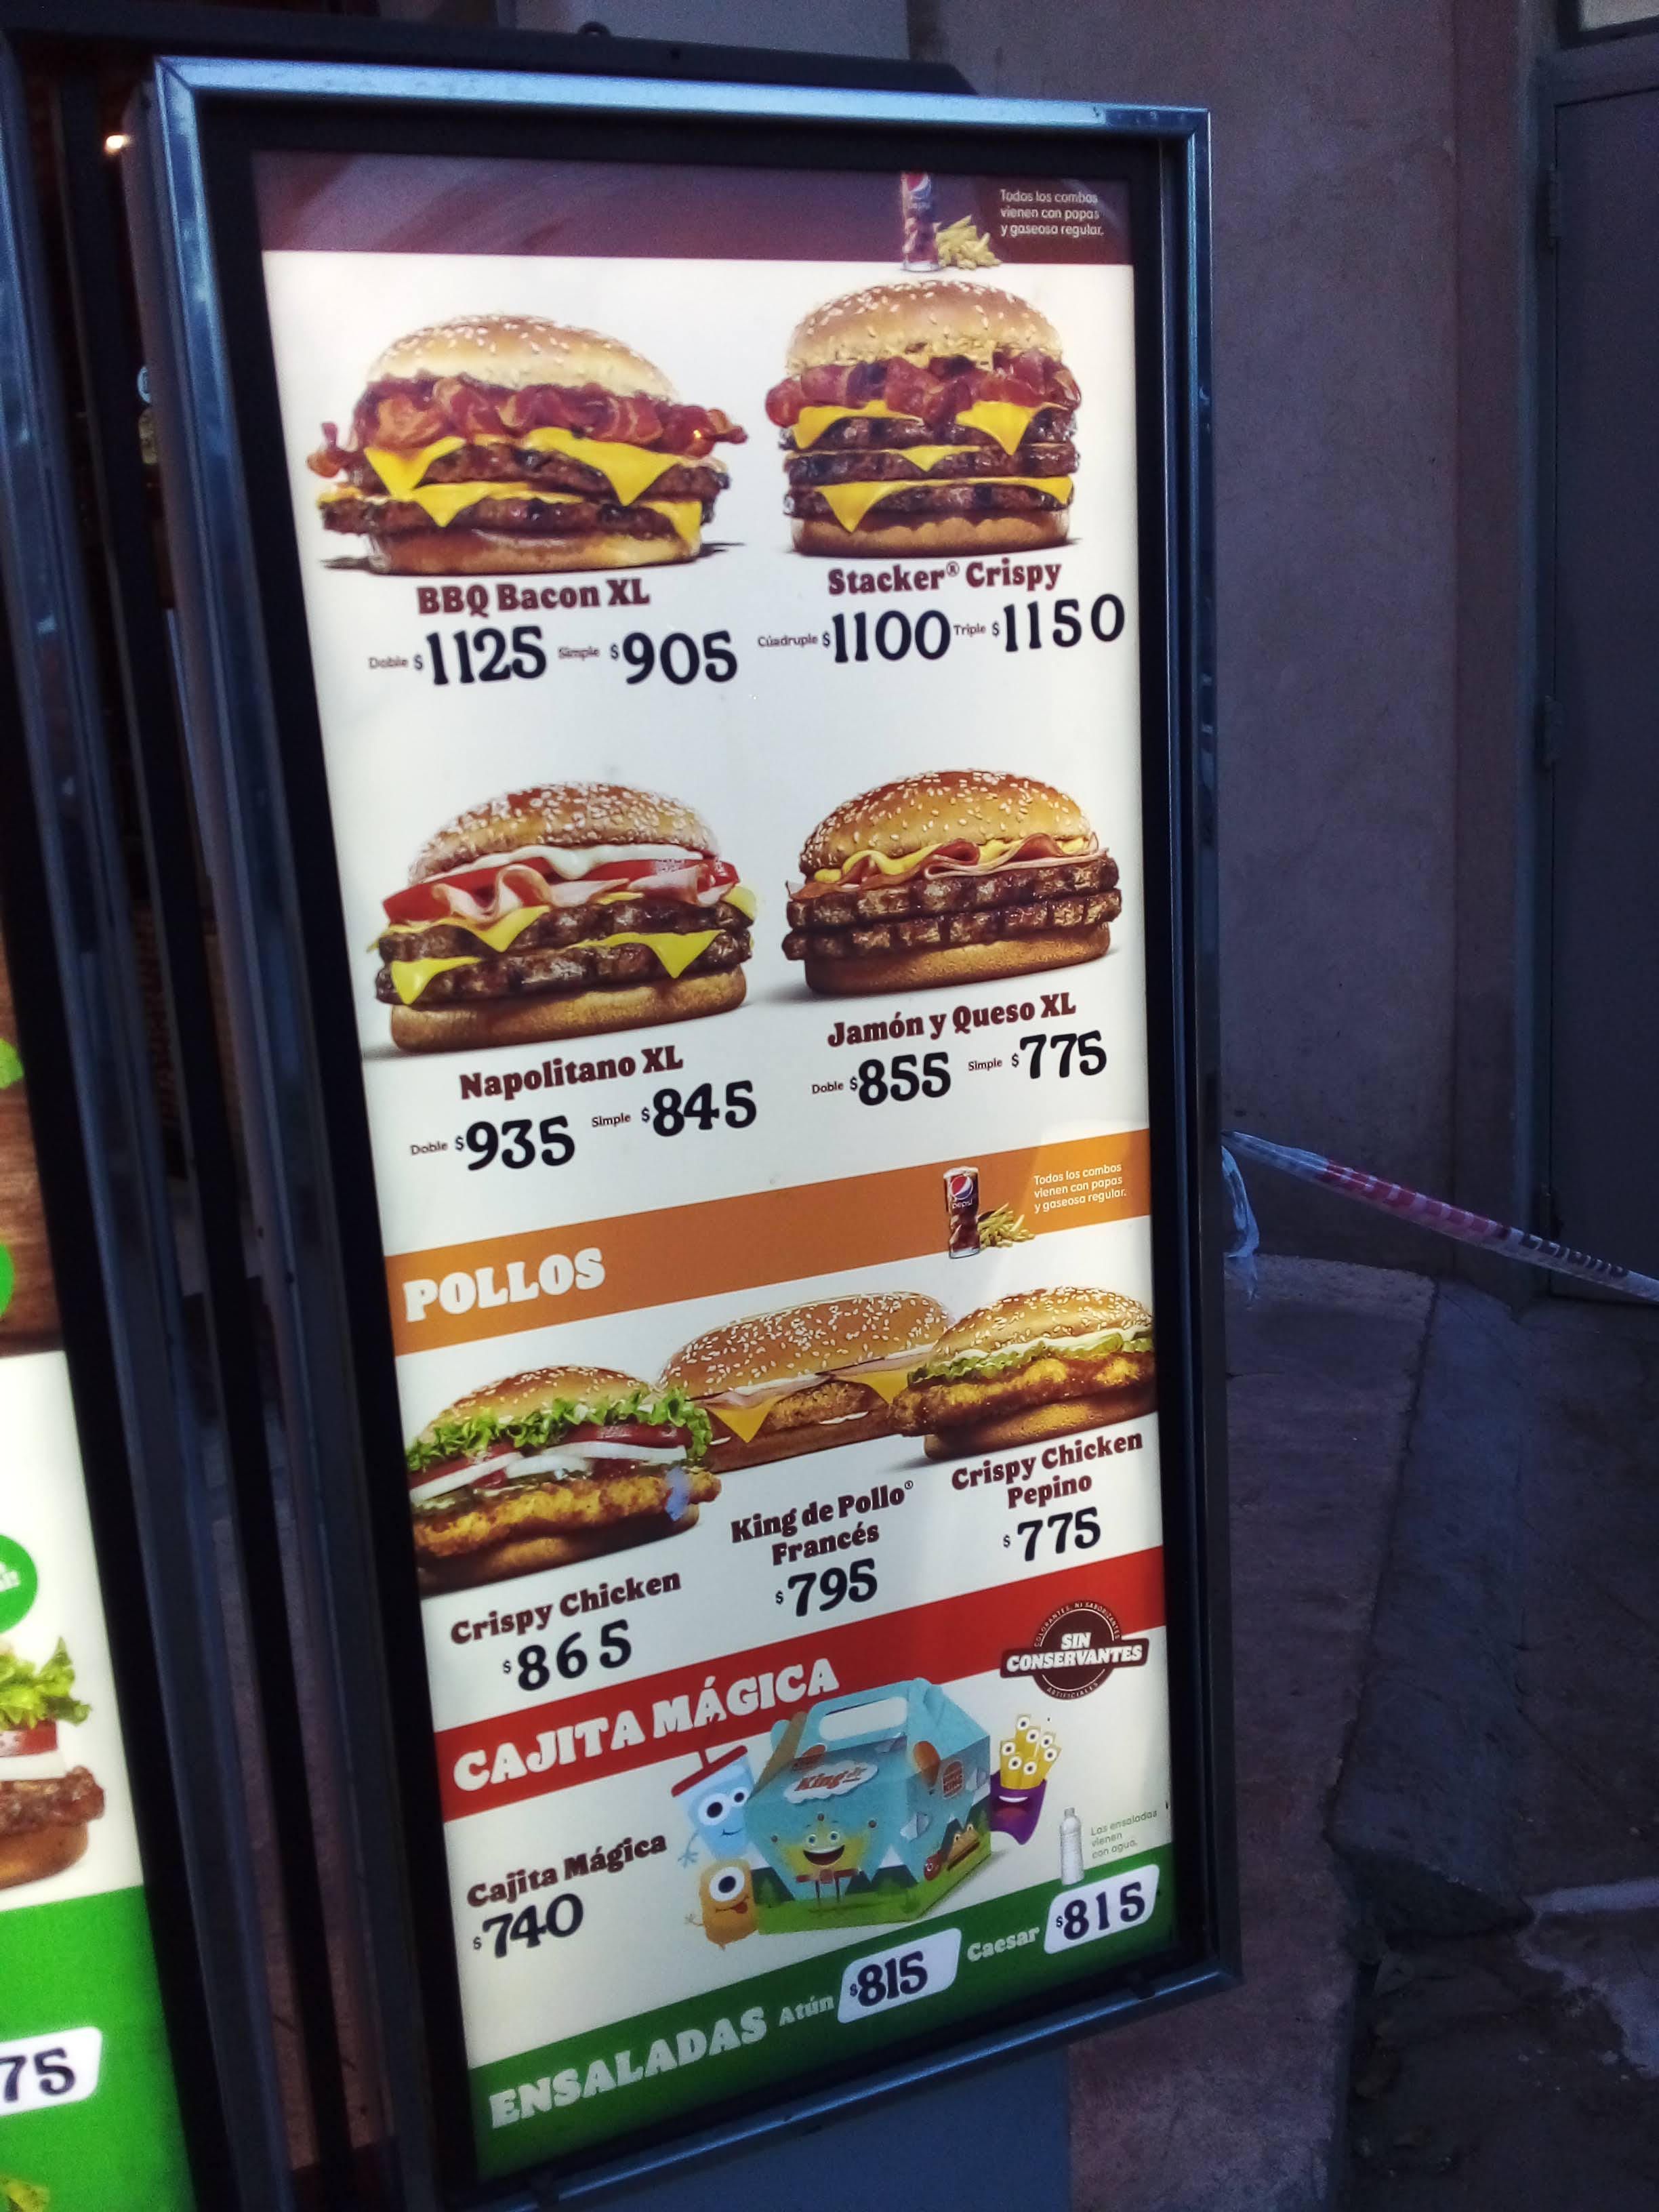 Yet Another Burger King Menu With 21 Design By Rami Yt On Deviantart